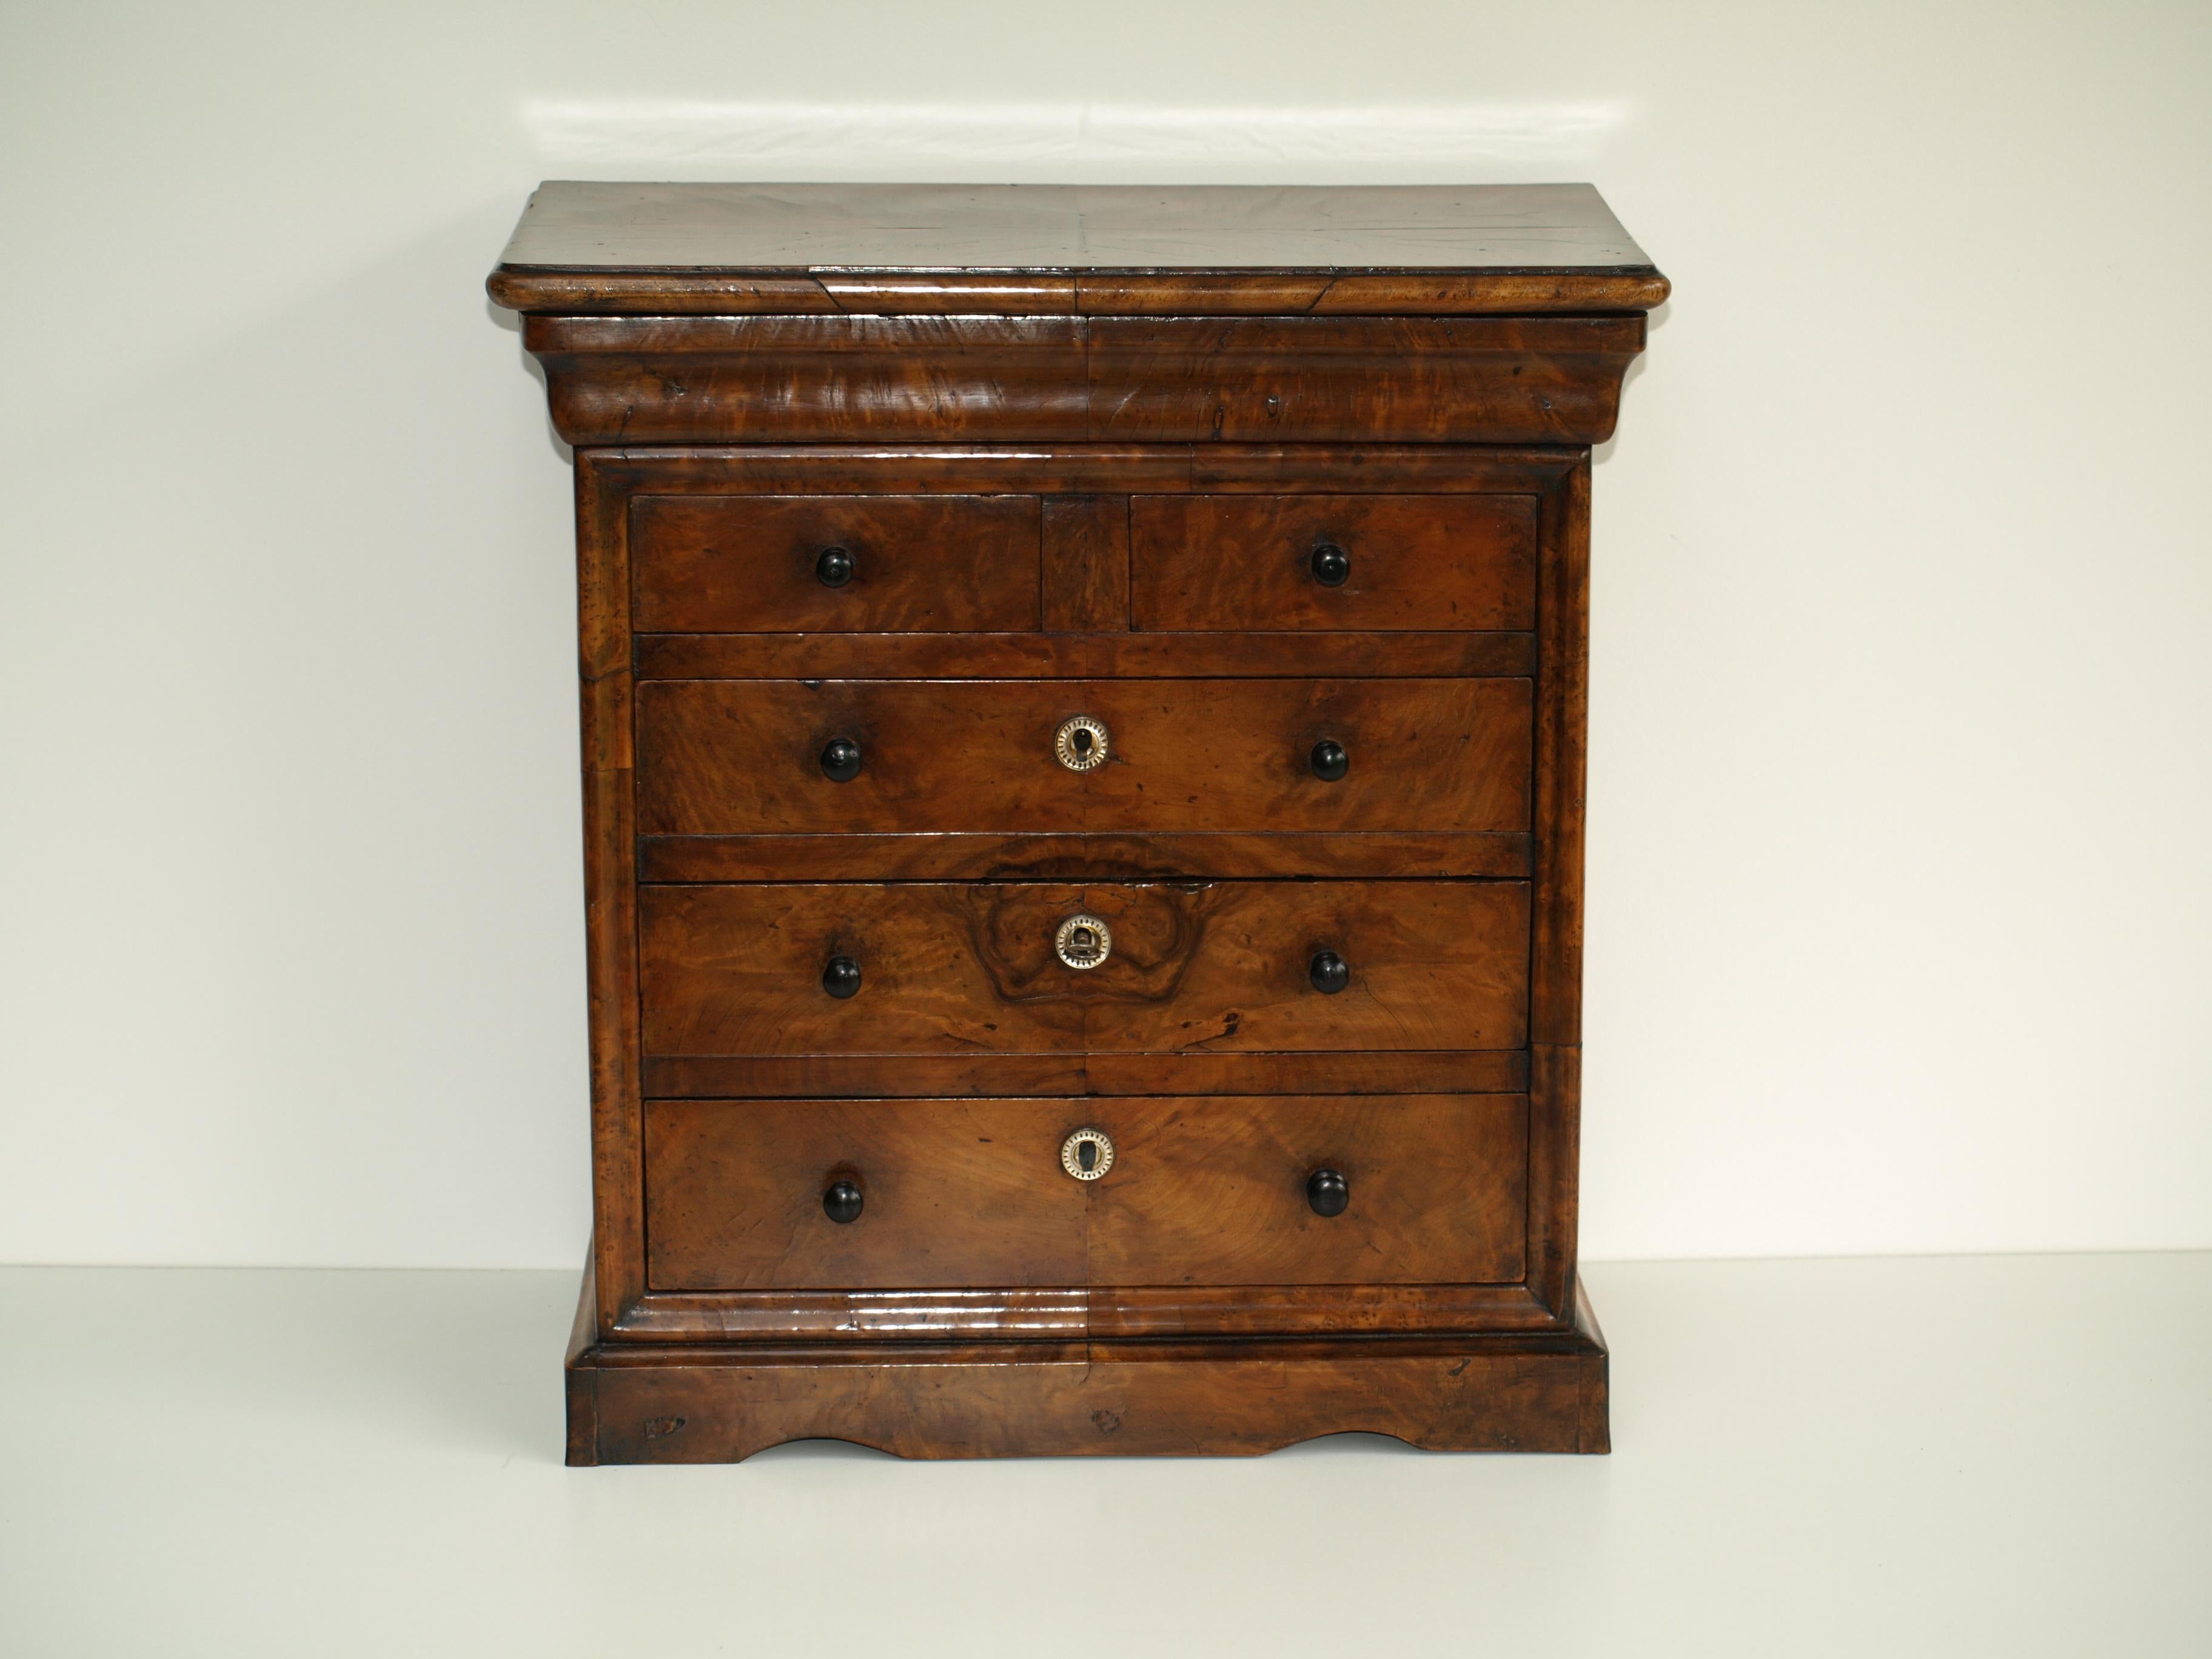 Small 19th century French five-drawer chest. The top quarter-veneered in well figured Yew wood and housing a moulded frieze drawer below. The drawers below with matched figured veneers. fitted with ebony turned knobs and mother-of-pearl escutcheons.